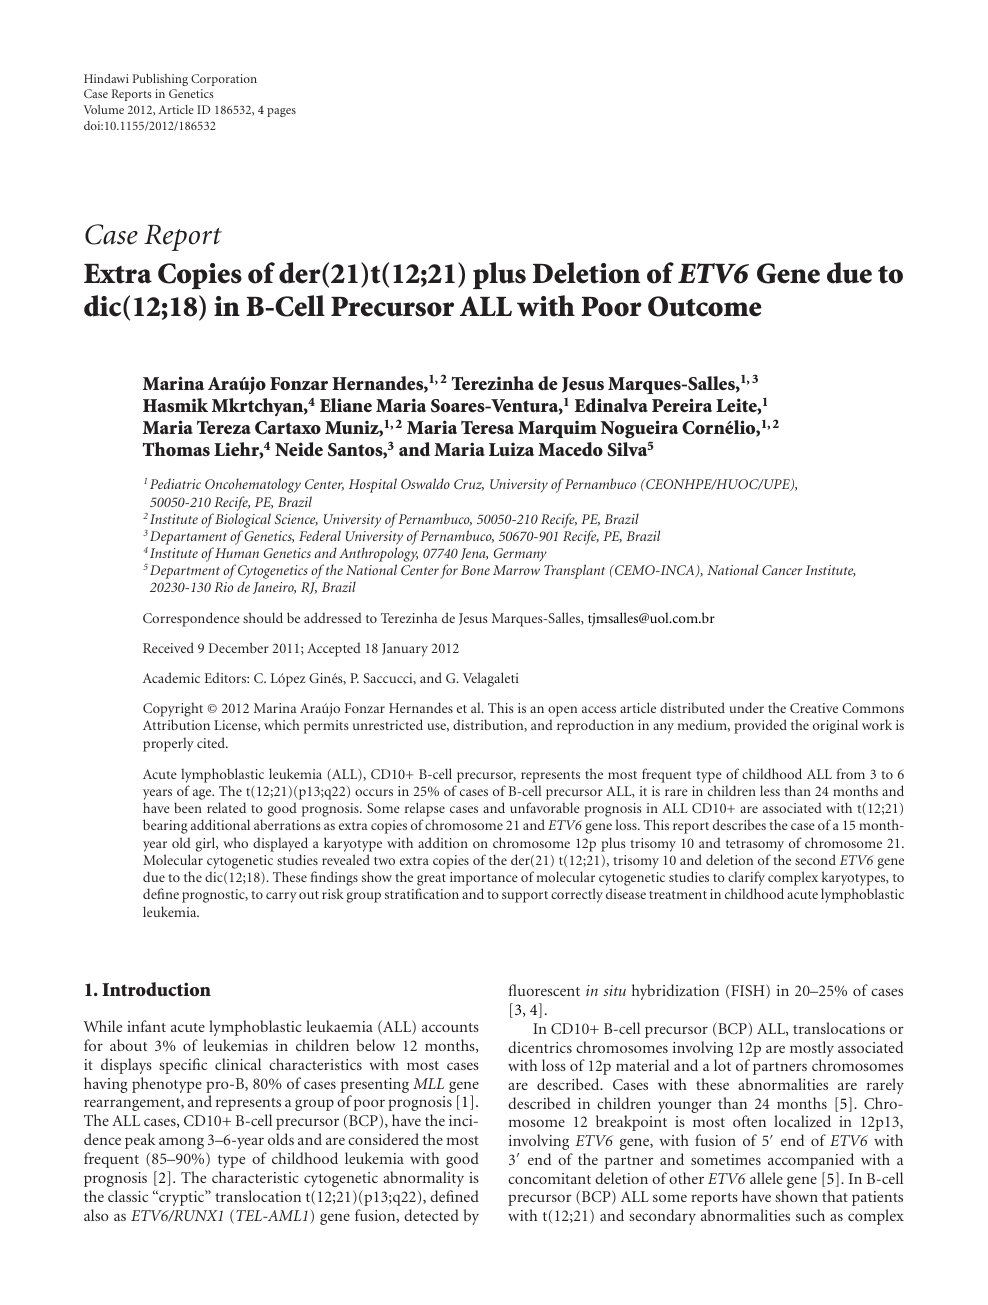 Extra Copies Of Der 21 T 12 21 Plus Deletion Of Etv6 Gene Due To Dic 12 18 In B Cell Precursor All With Poor Outcome Topic Of Research Paper In Clinical Medicine Download Scholarly Article Pdf And